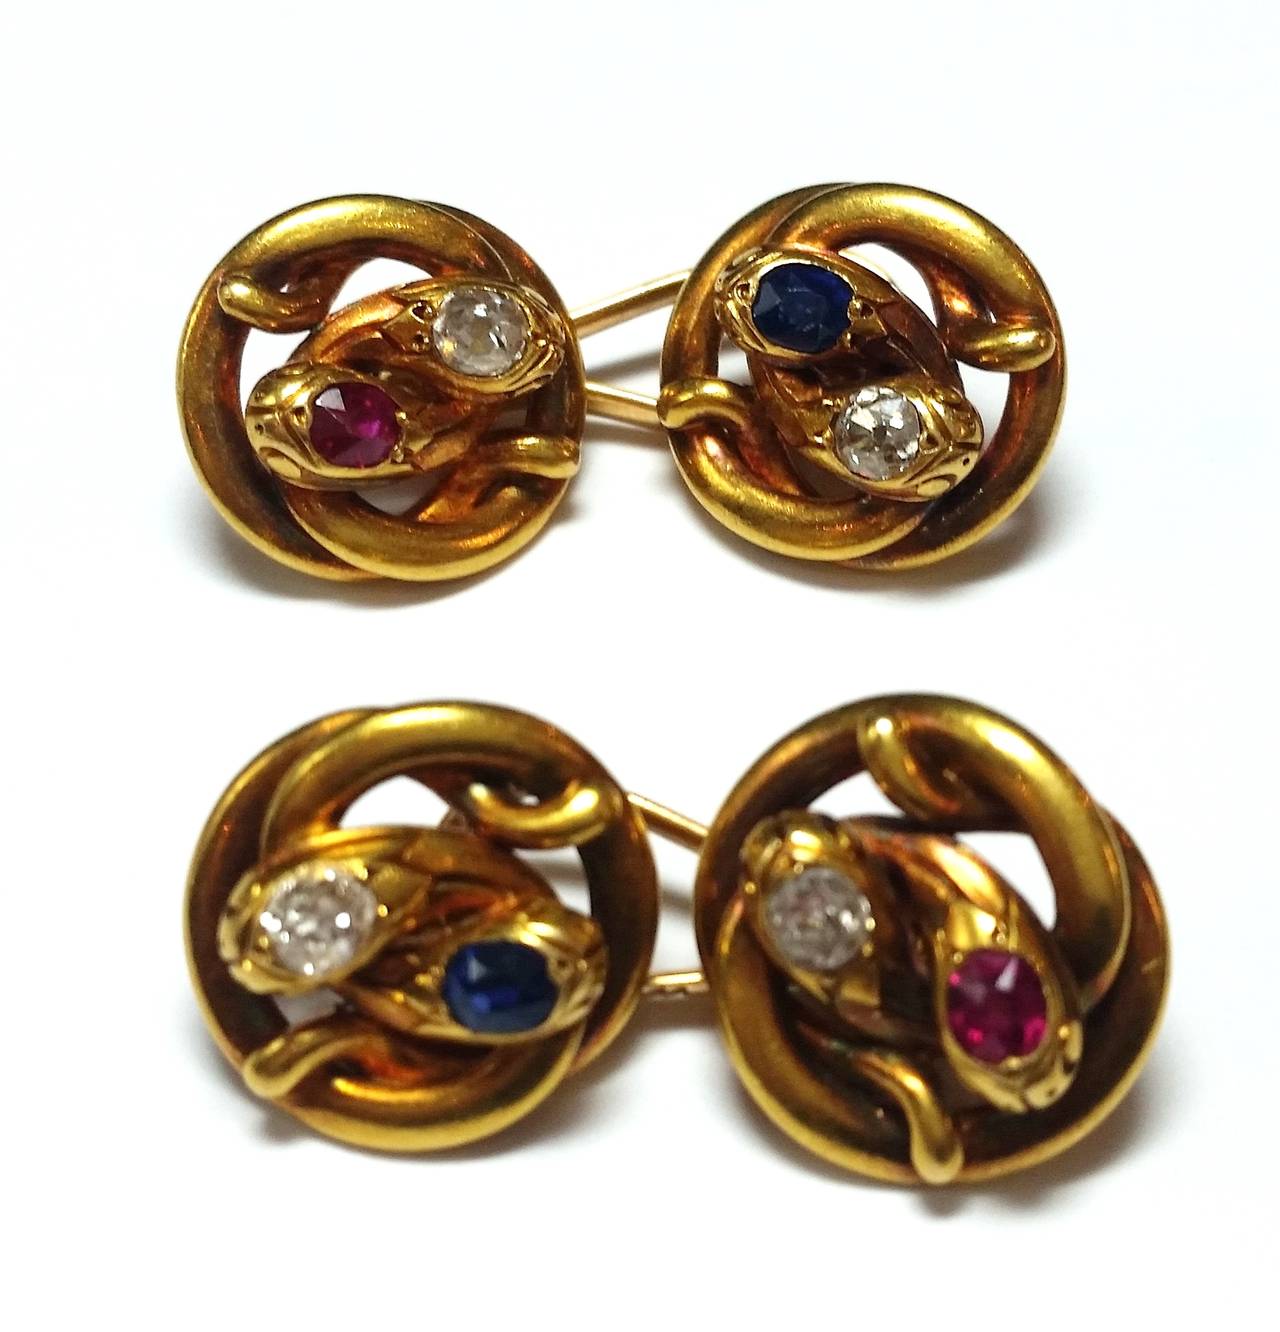 Early 20th century cufflinks representing snakes
Yellow gold, diamond and sapphires
French hallmarks